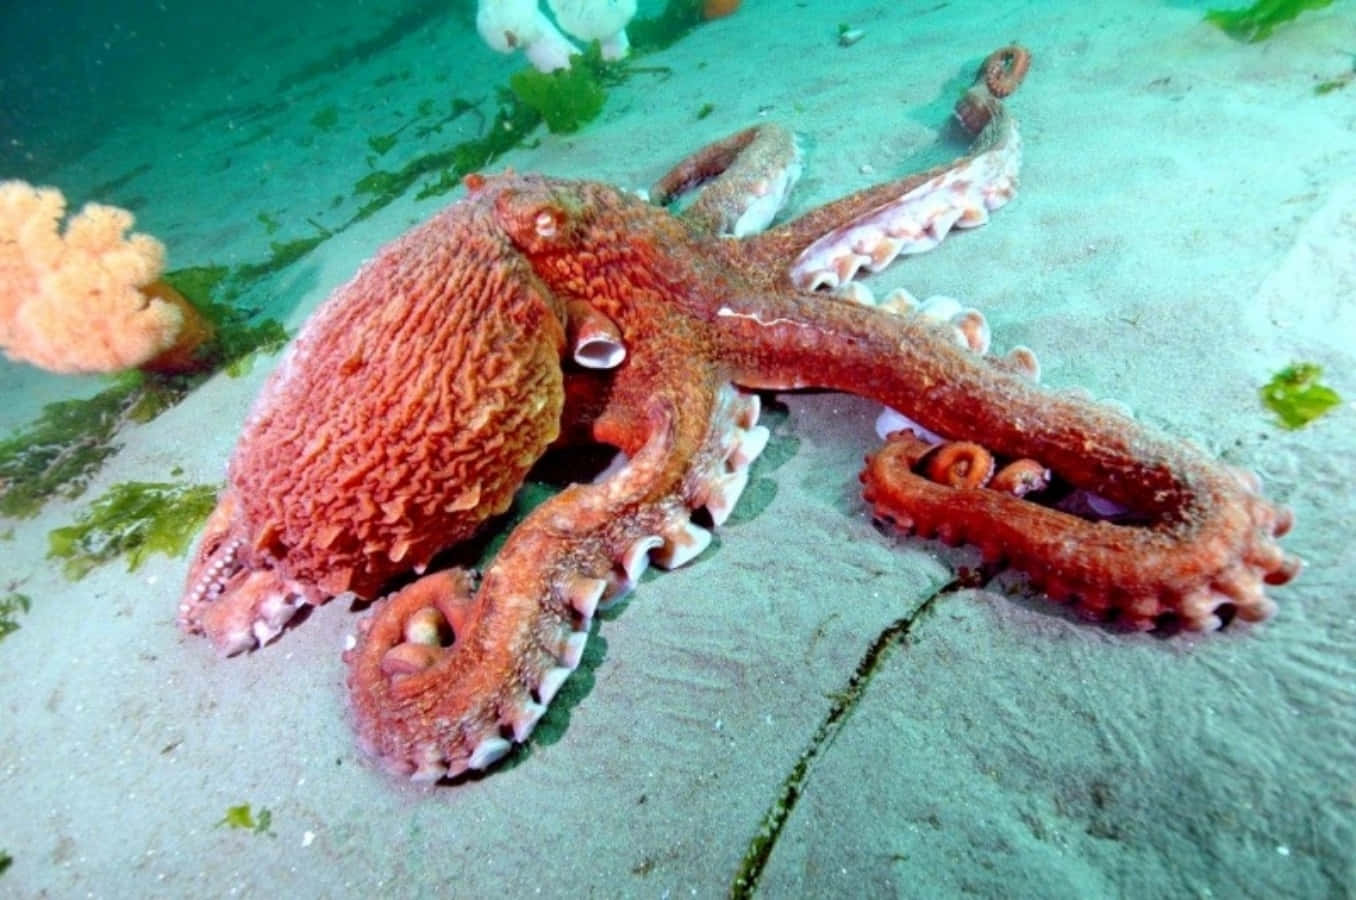 Underwater Magnificence: Giant Pacific Octopus Wallpaper